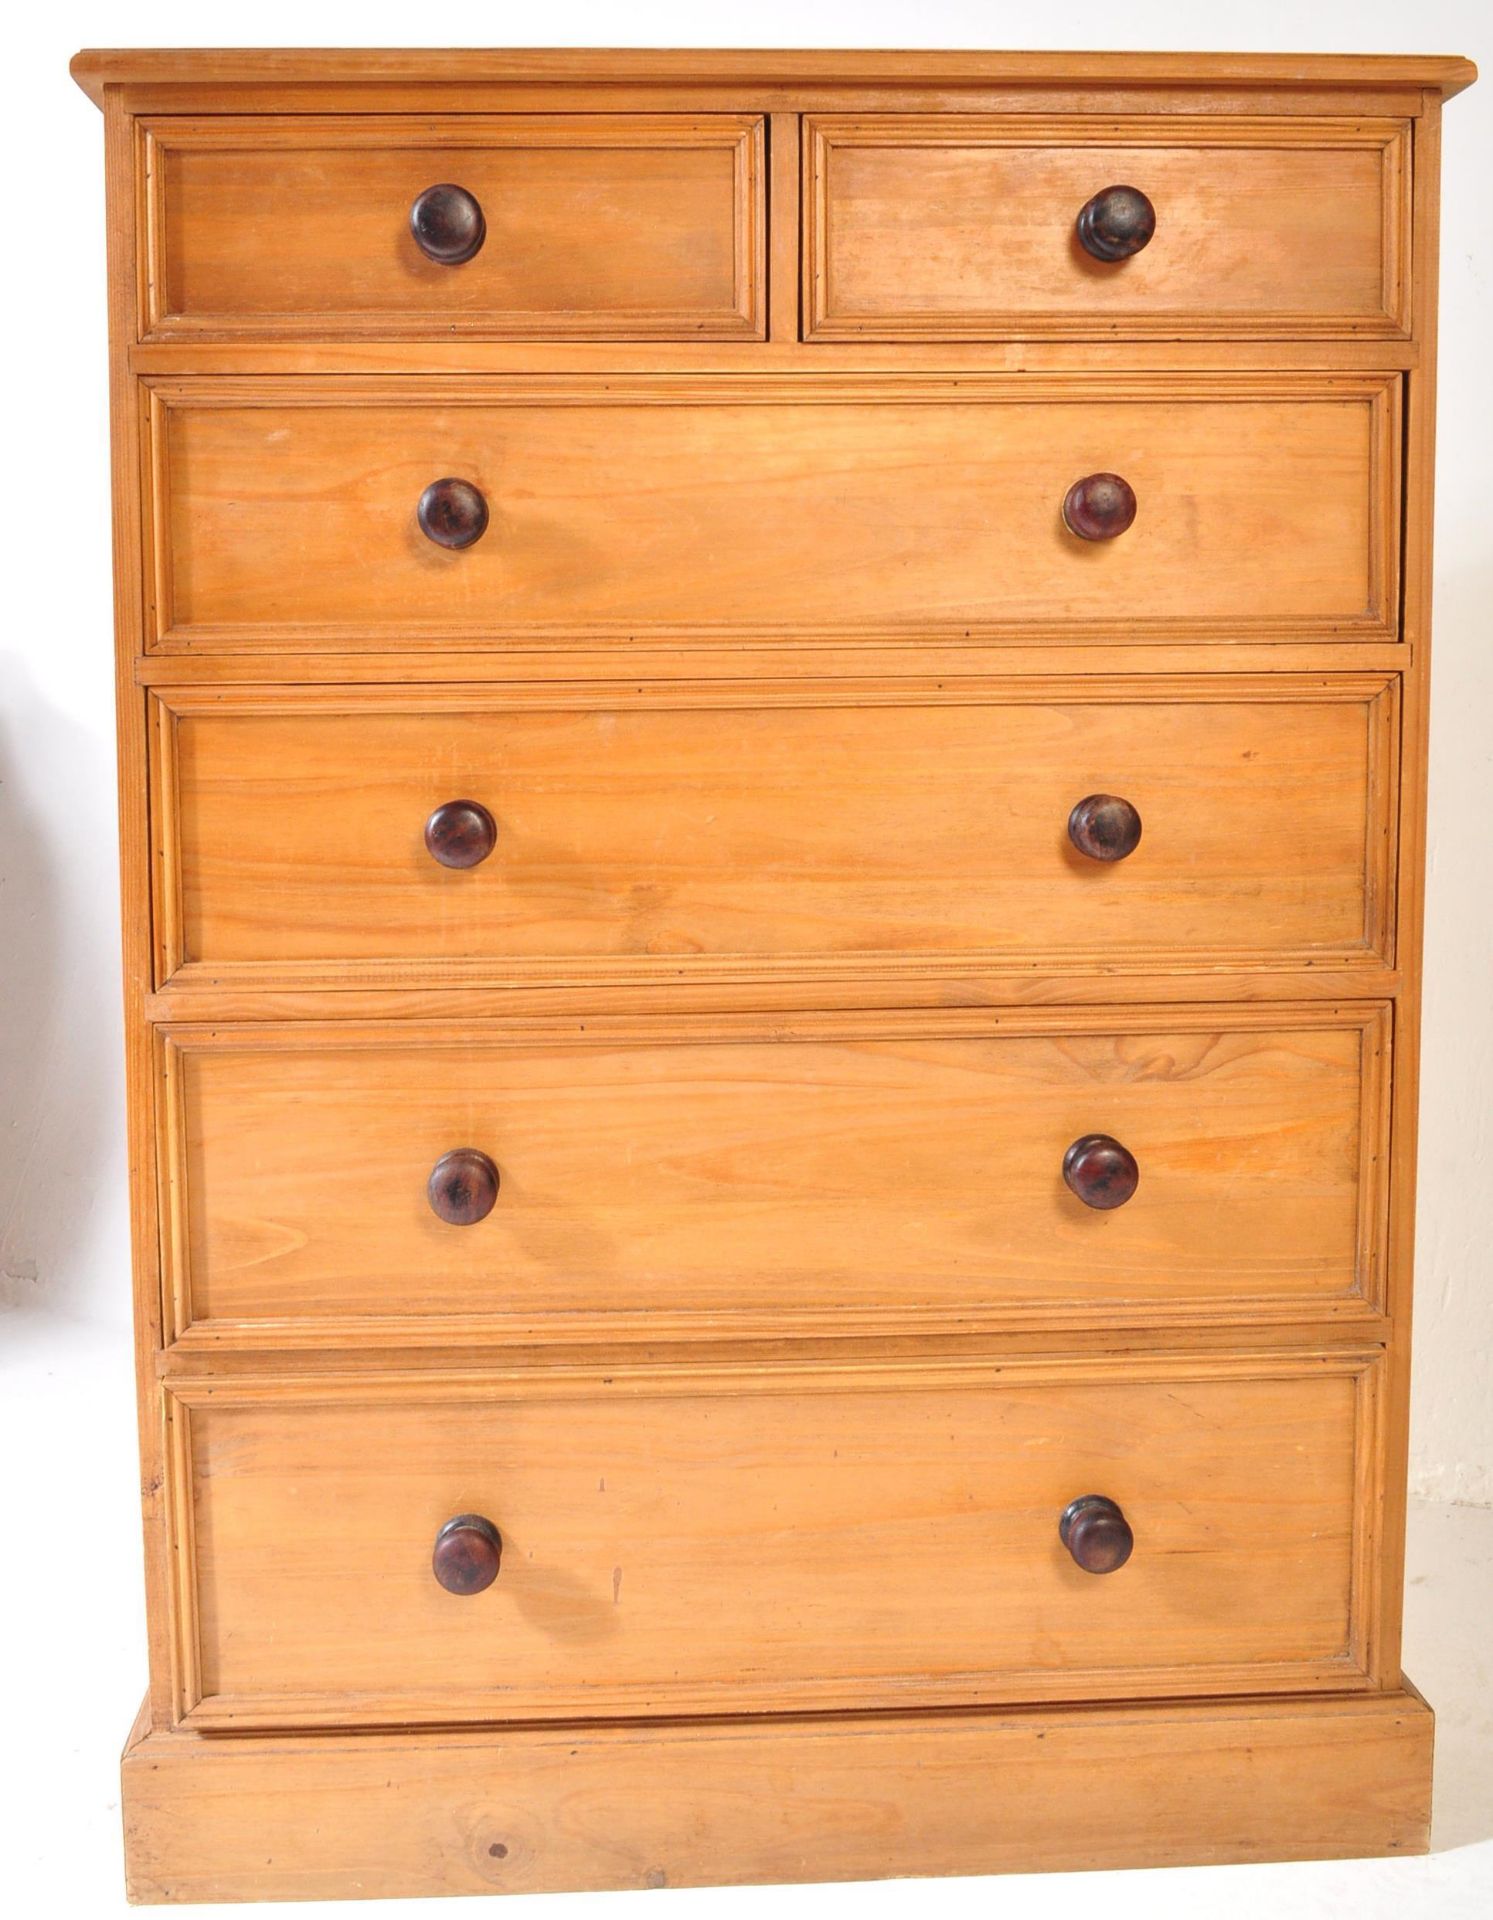 CONTEMPORARY PINE CHEST OF DRAWERS - Image 3 of 6